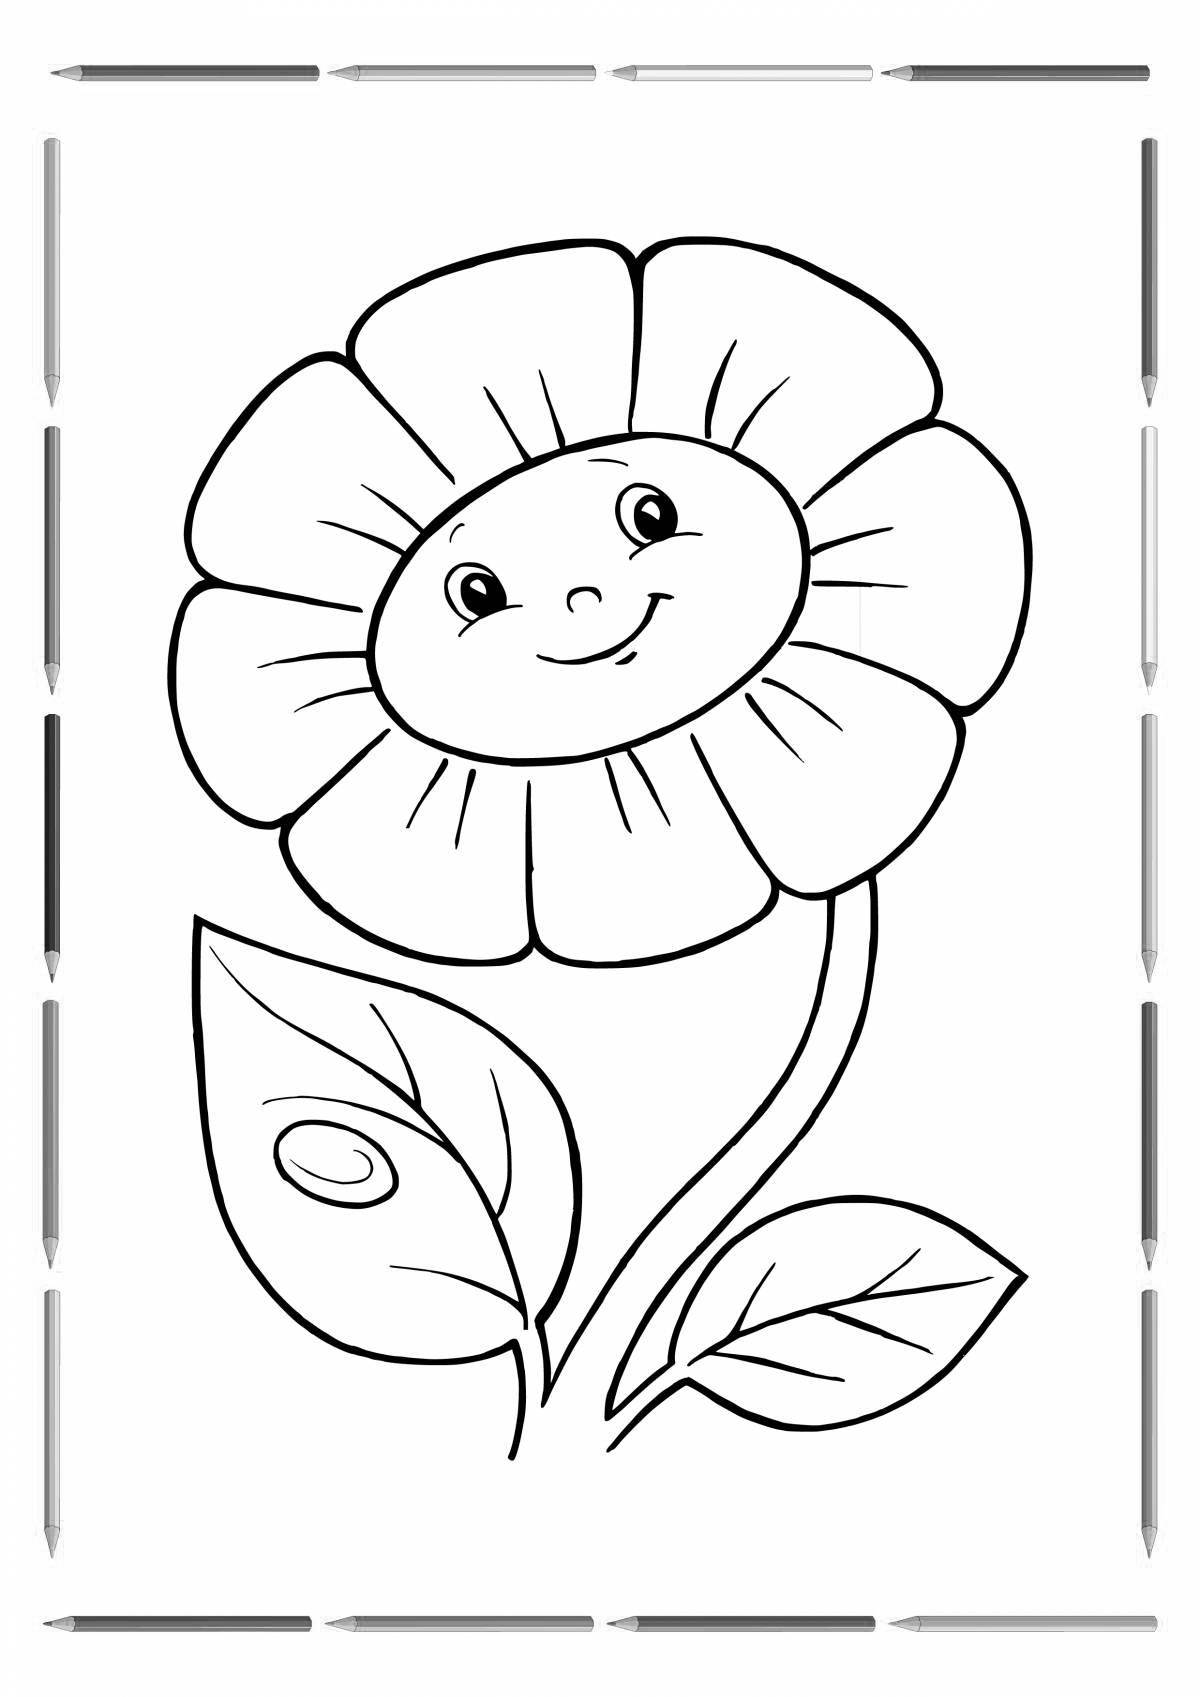 Delightful coloring book for beginners